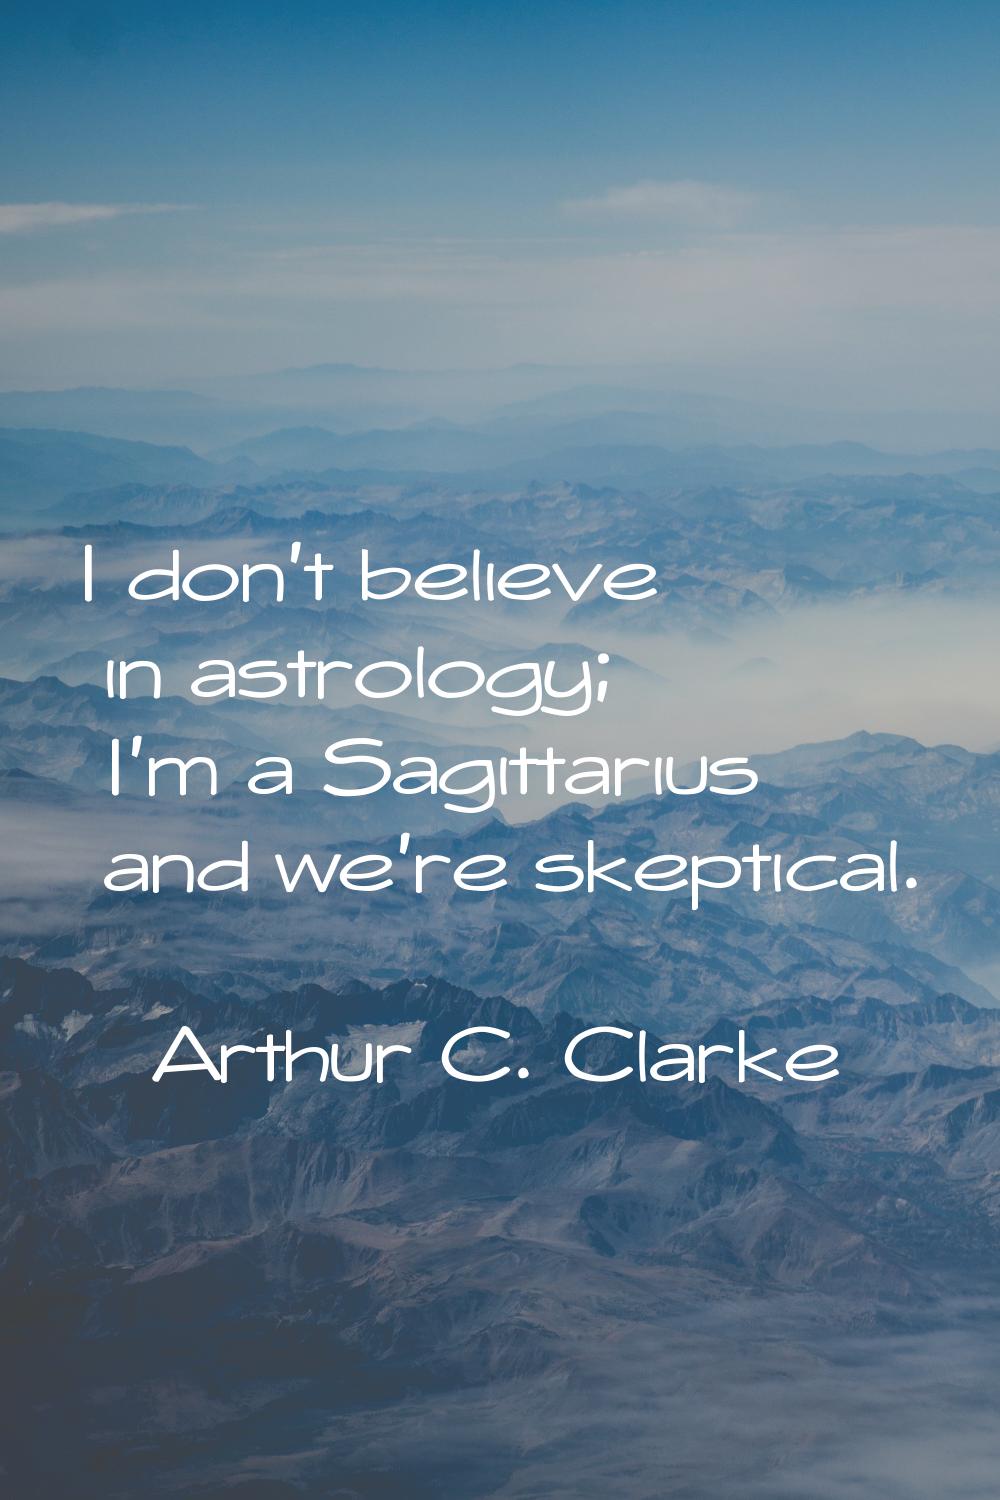 I don't believe in astrology; I'm a Sagittarius and we're skeptical.